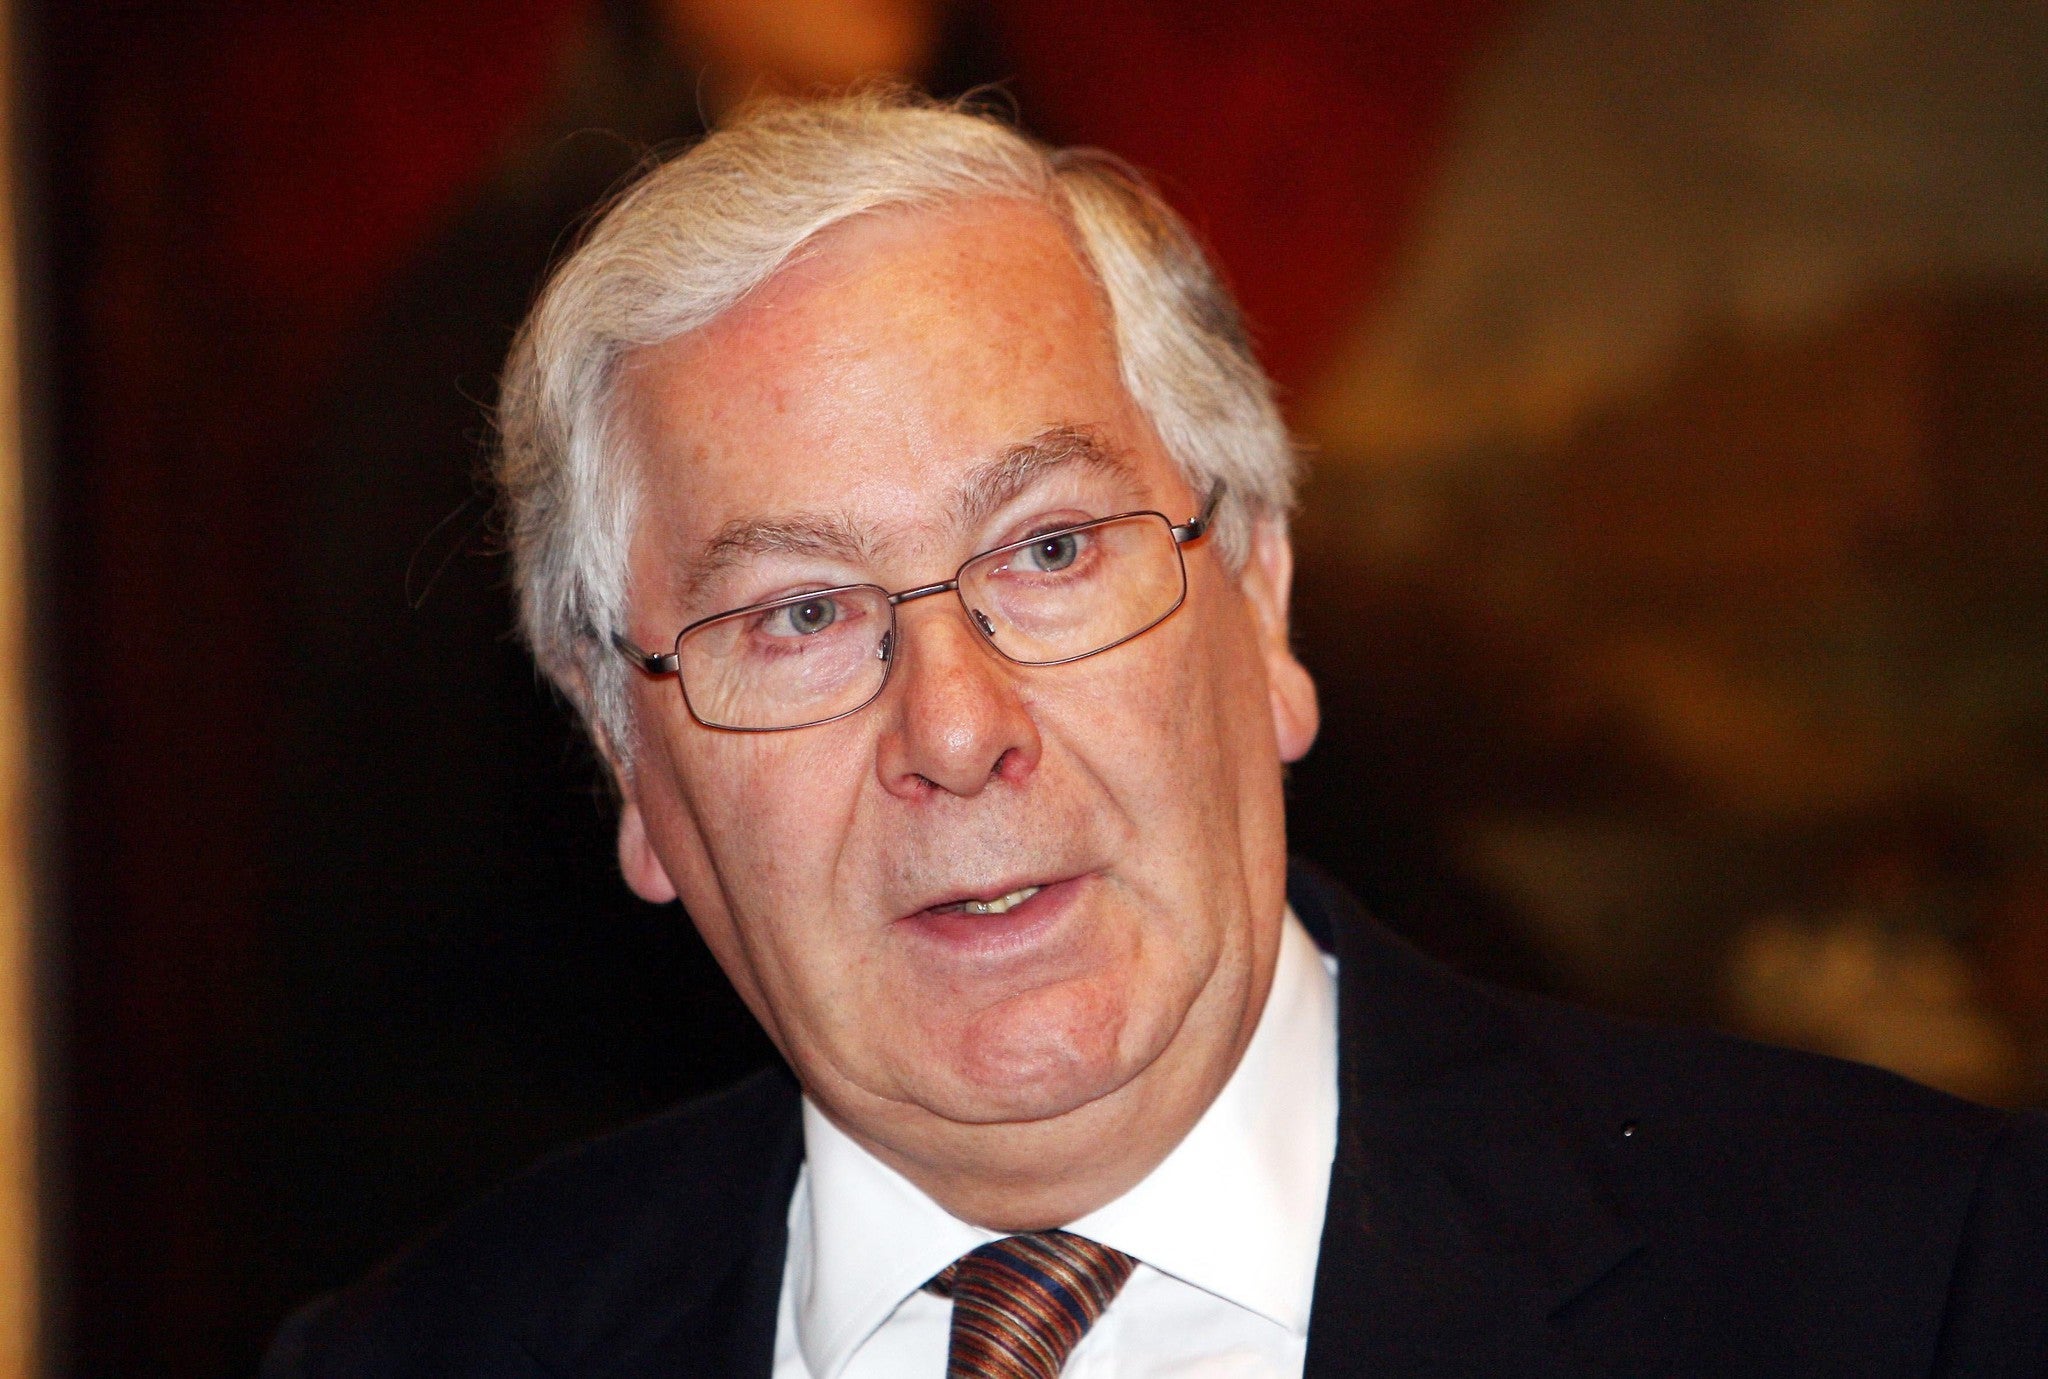 Mervyn King claims QE has boosted the economy by 2 per cent